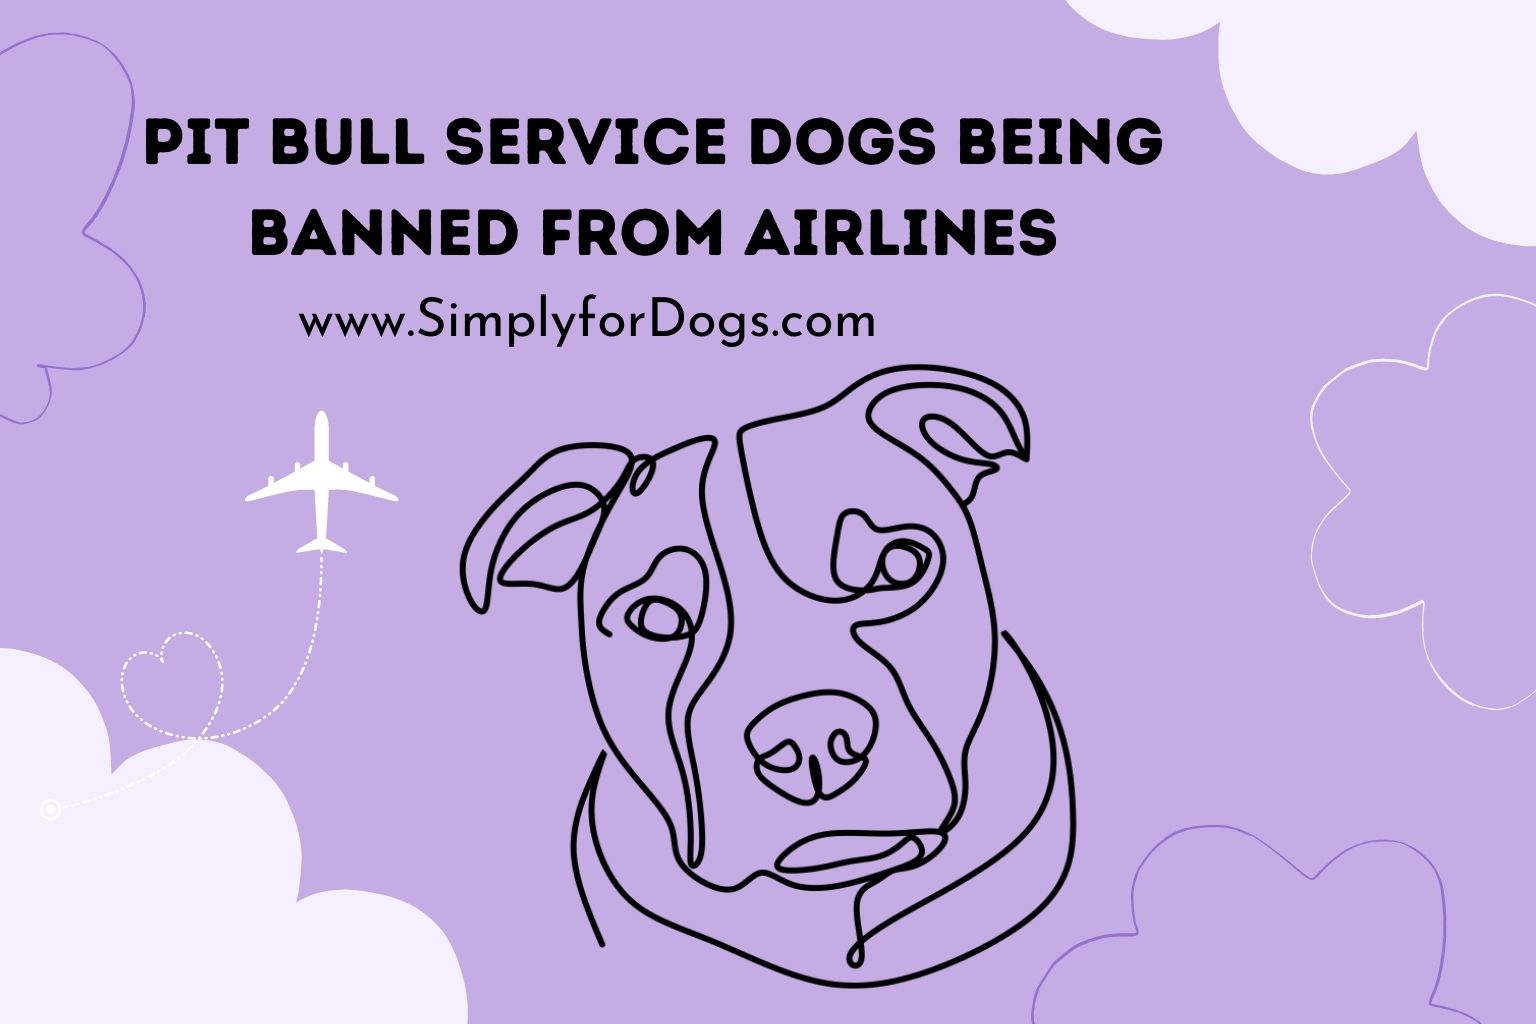 Pit Bull Service Dogs Being Banned from Airlines